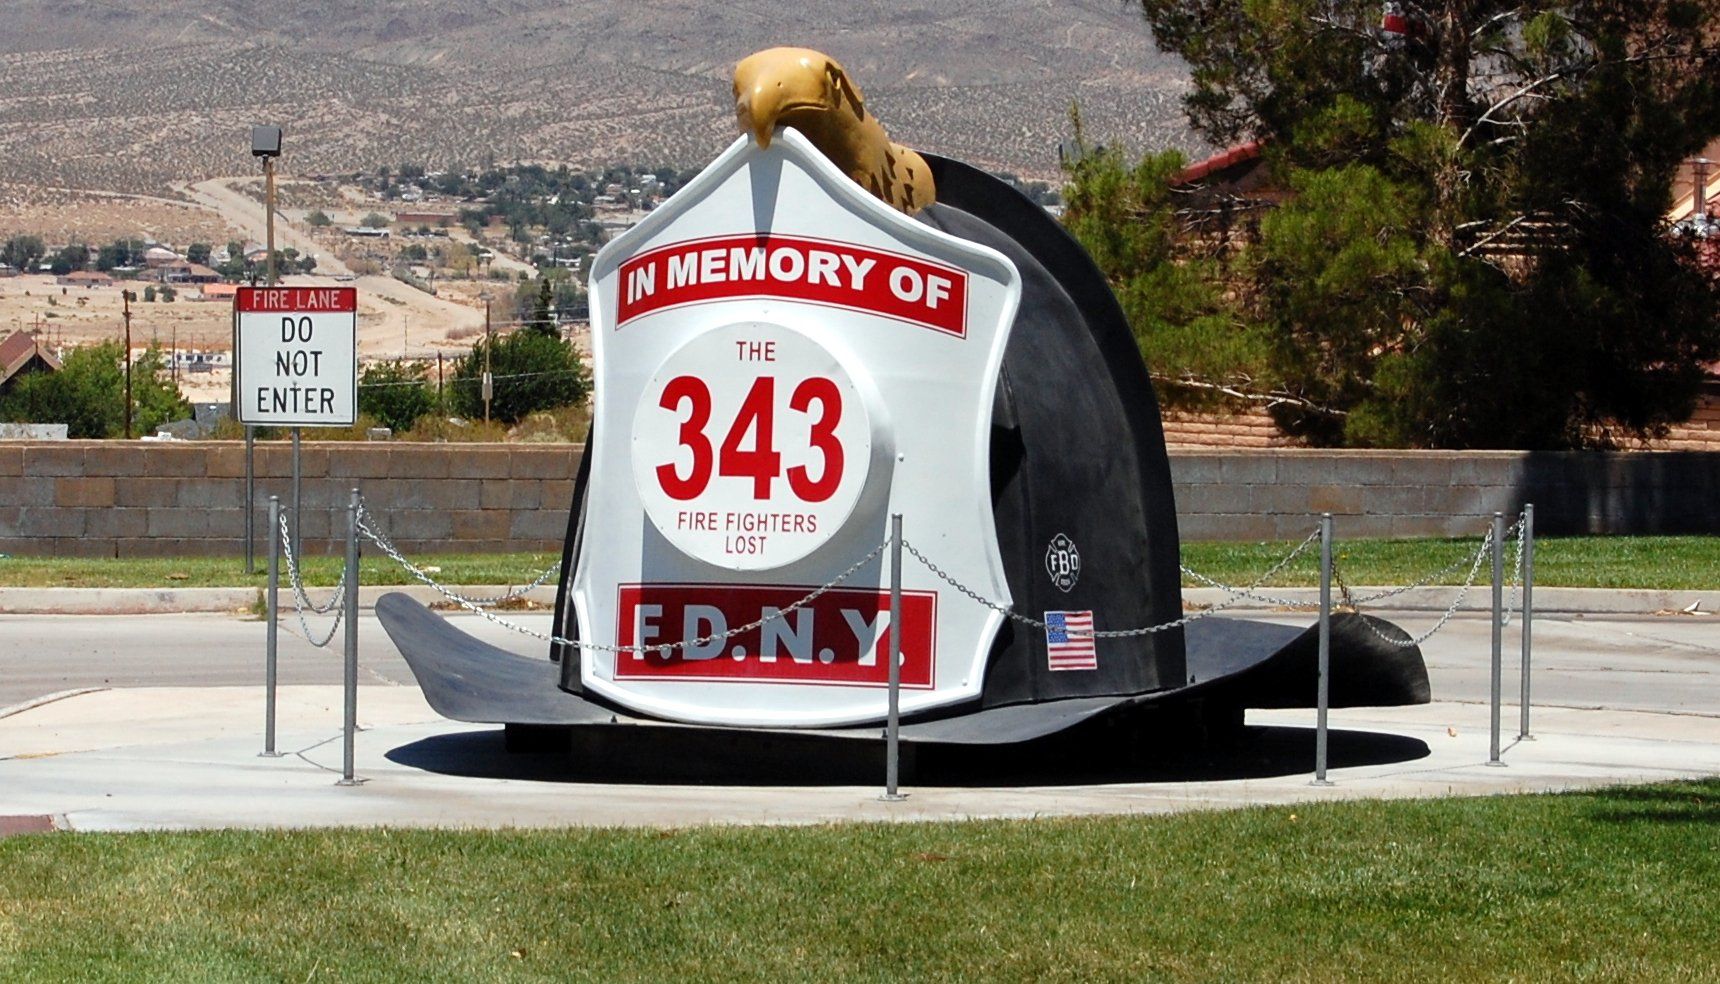 World's Largest Fire Helmet Sculpture: world record set in Barstow, California